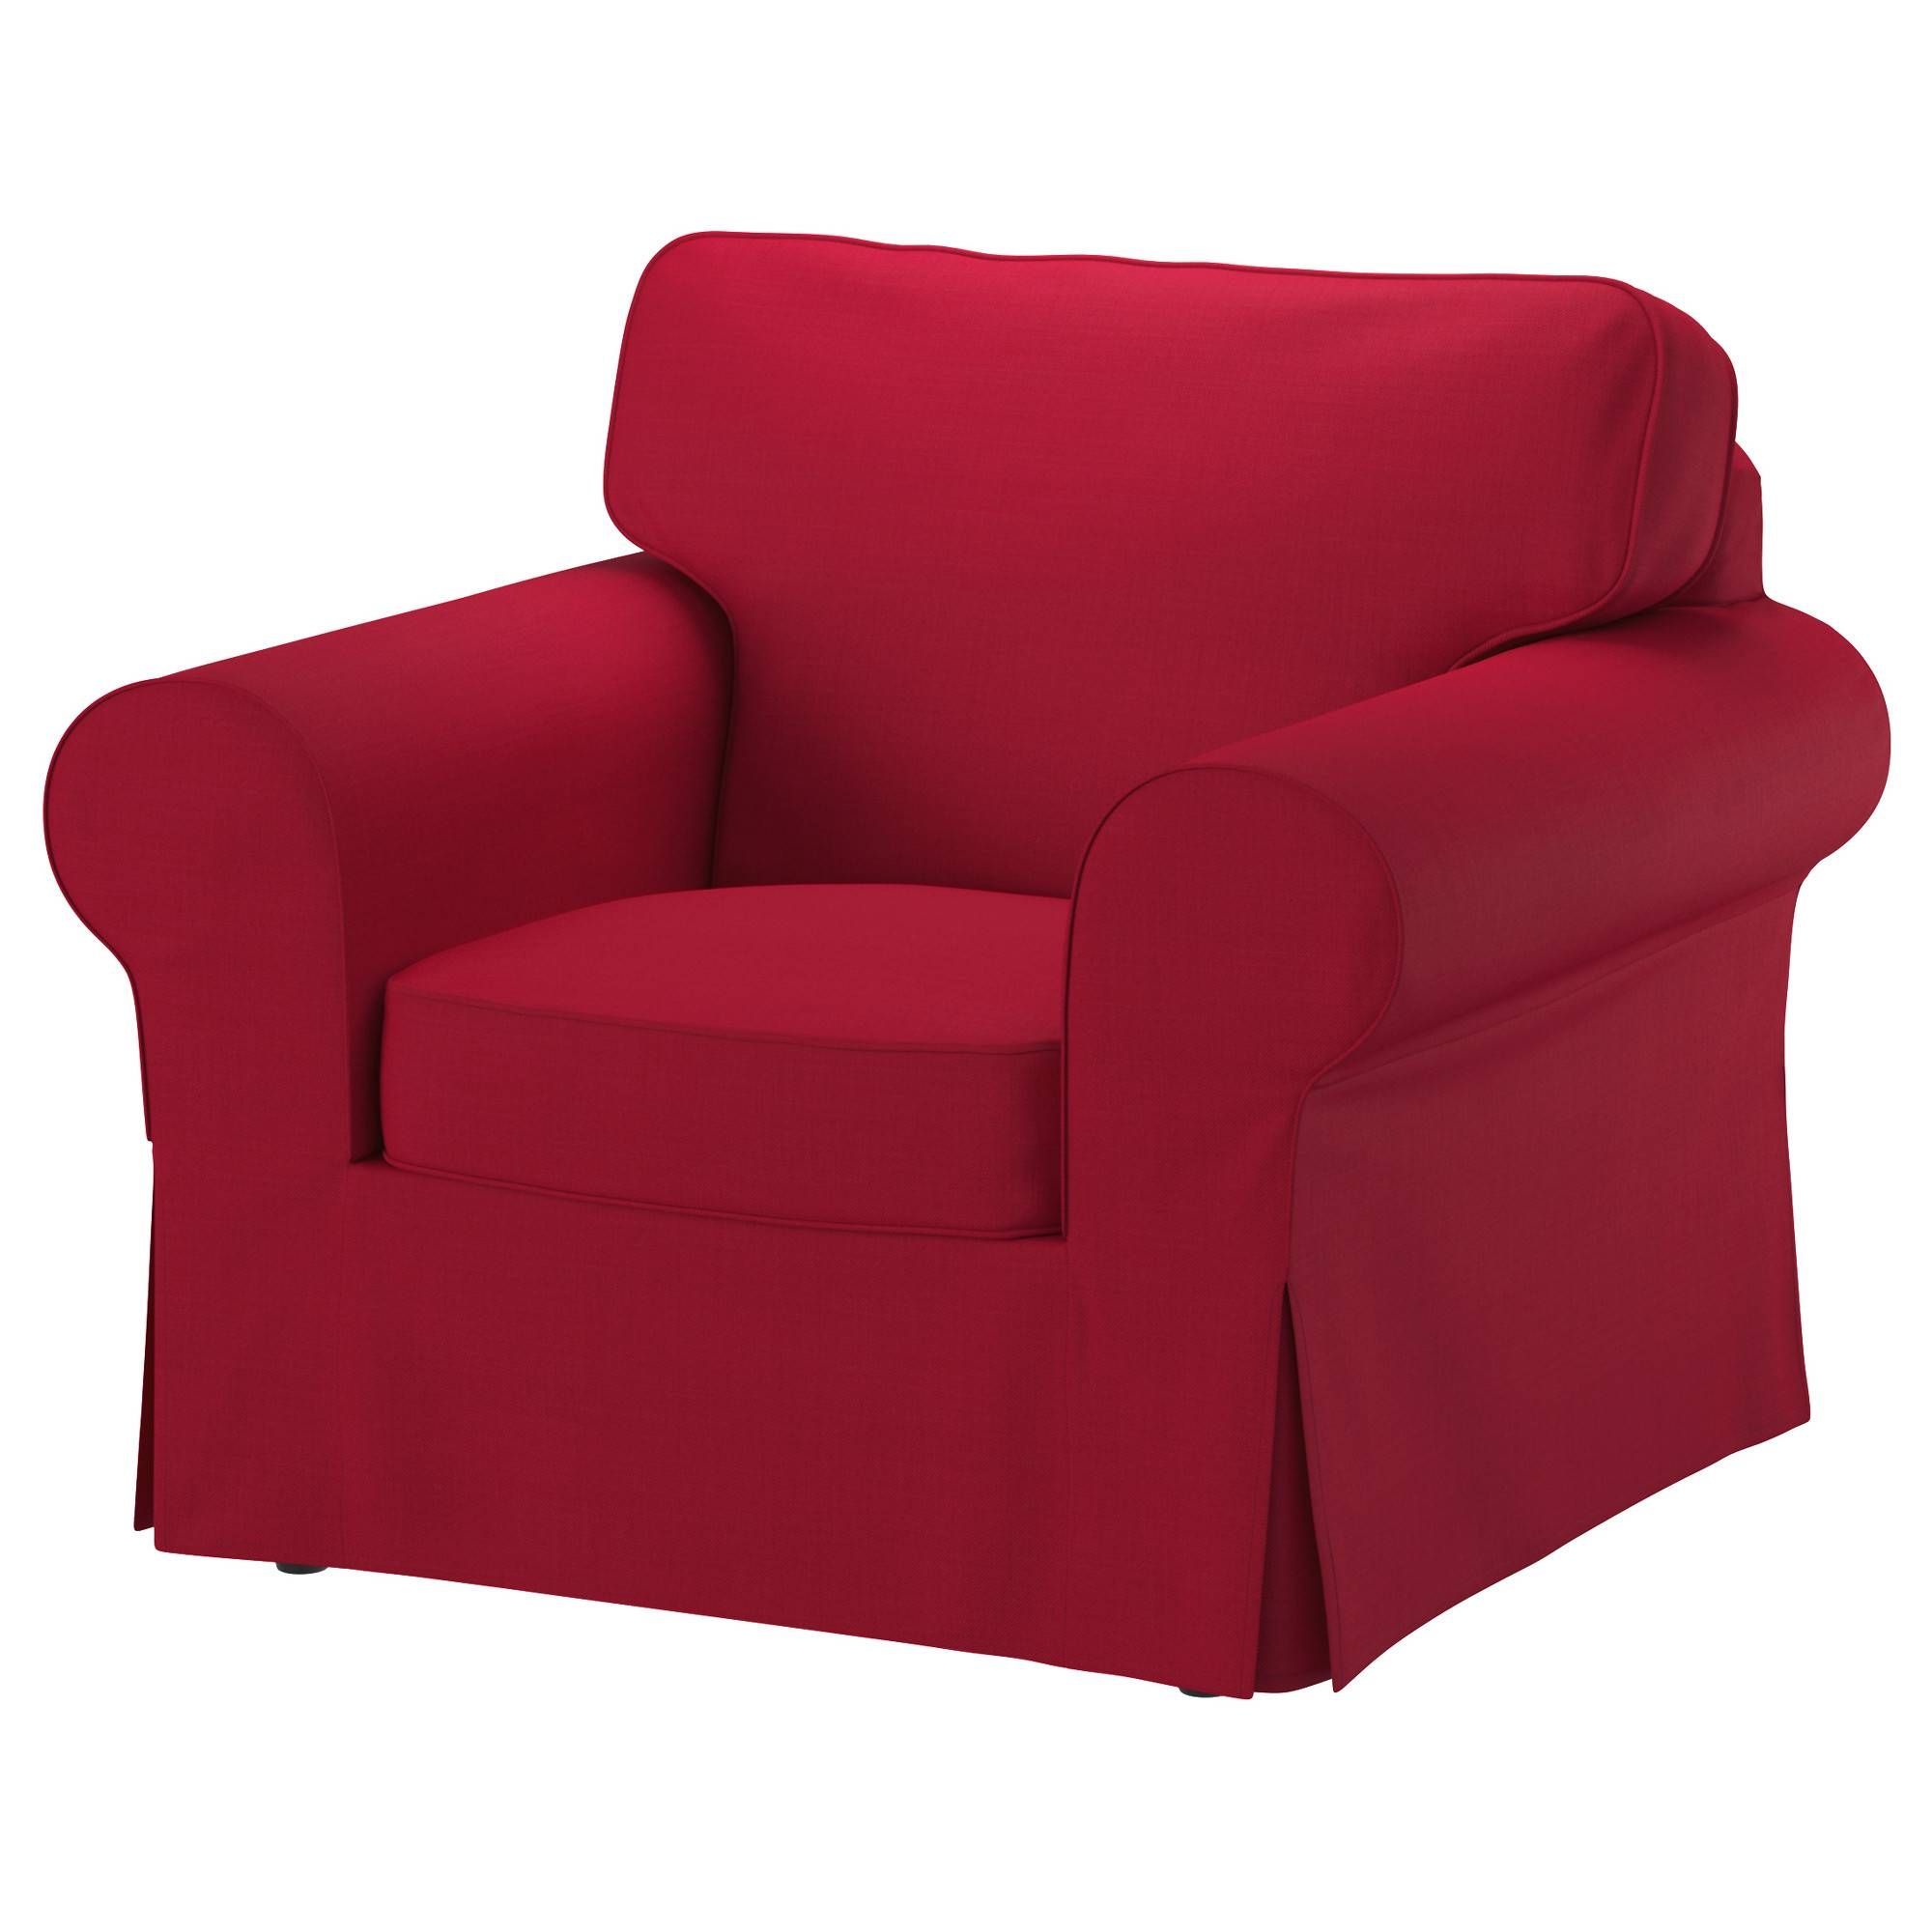 Chair The Whimsical Wife Wingback Chair Slipcovers At Long Last Throughout Sofa Armchair Covers (View 12 of 30)